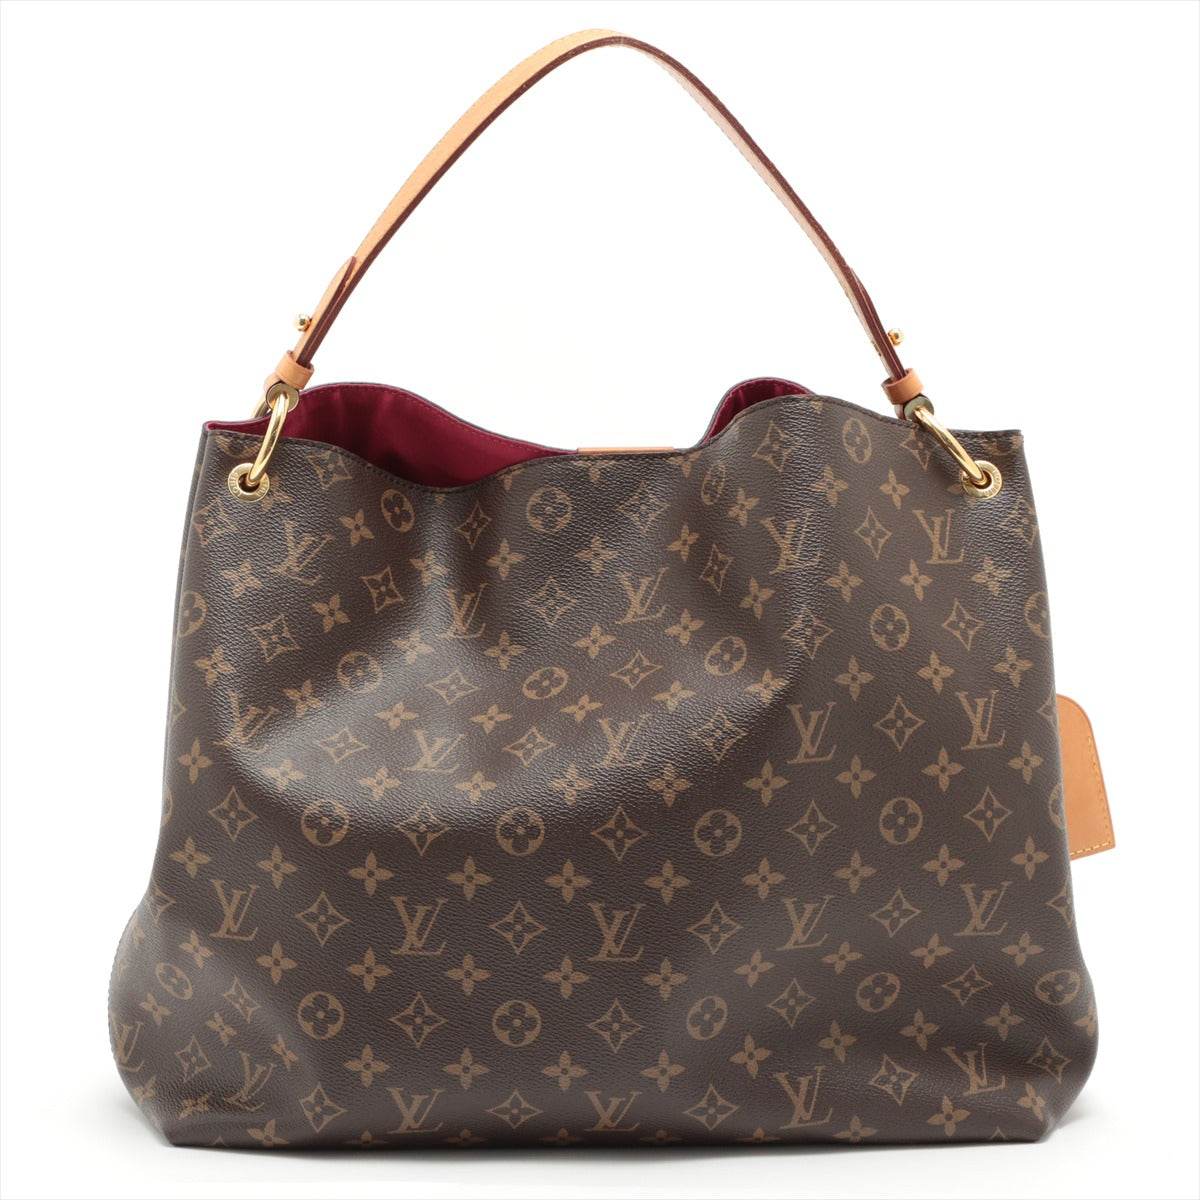 The Louis Vuitton Graceful bag is a bag that is perfect for daily